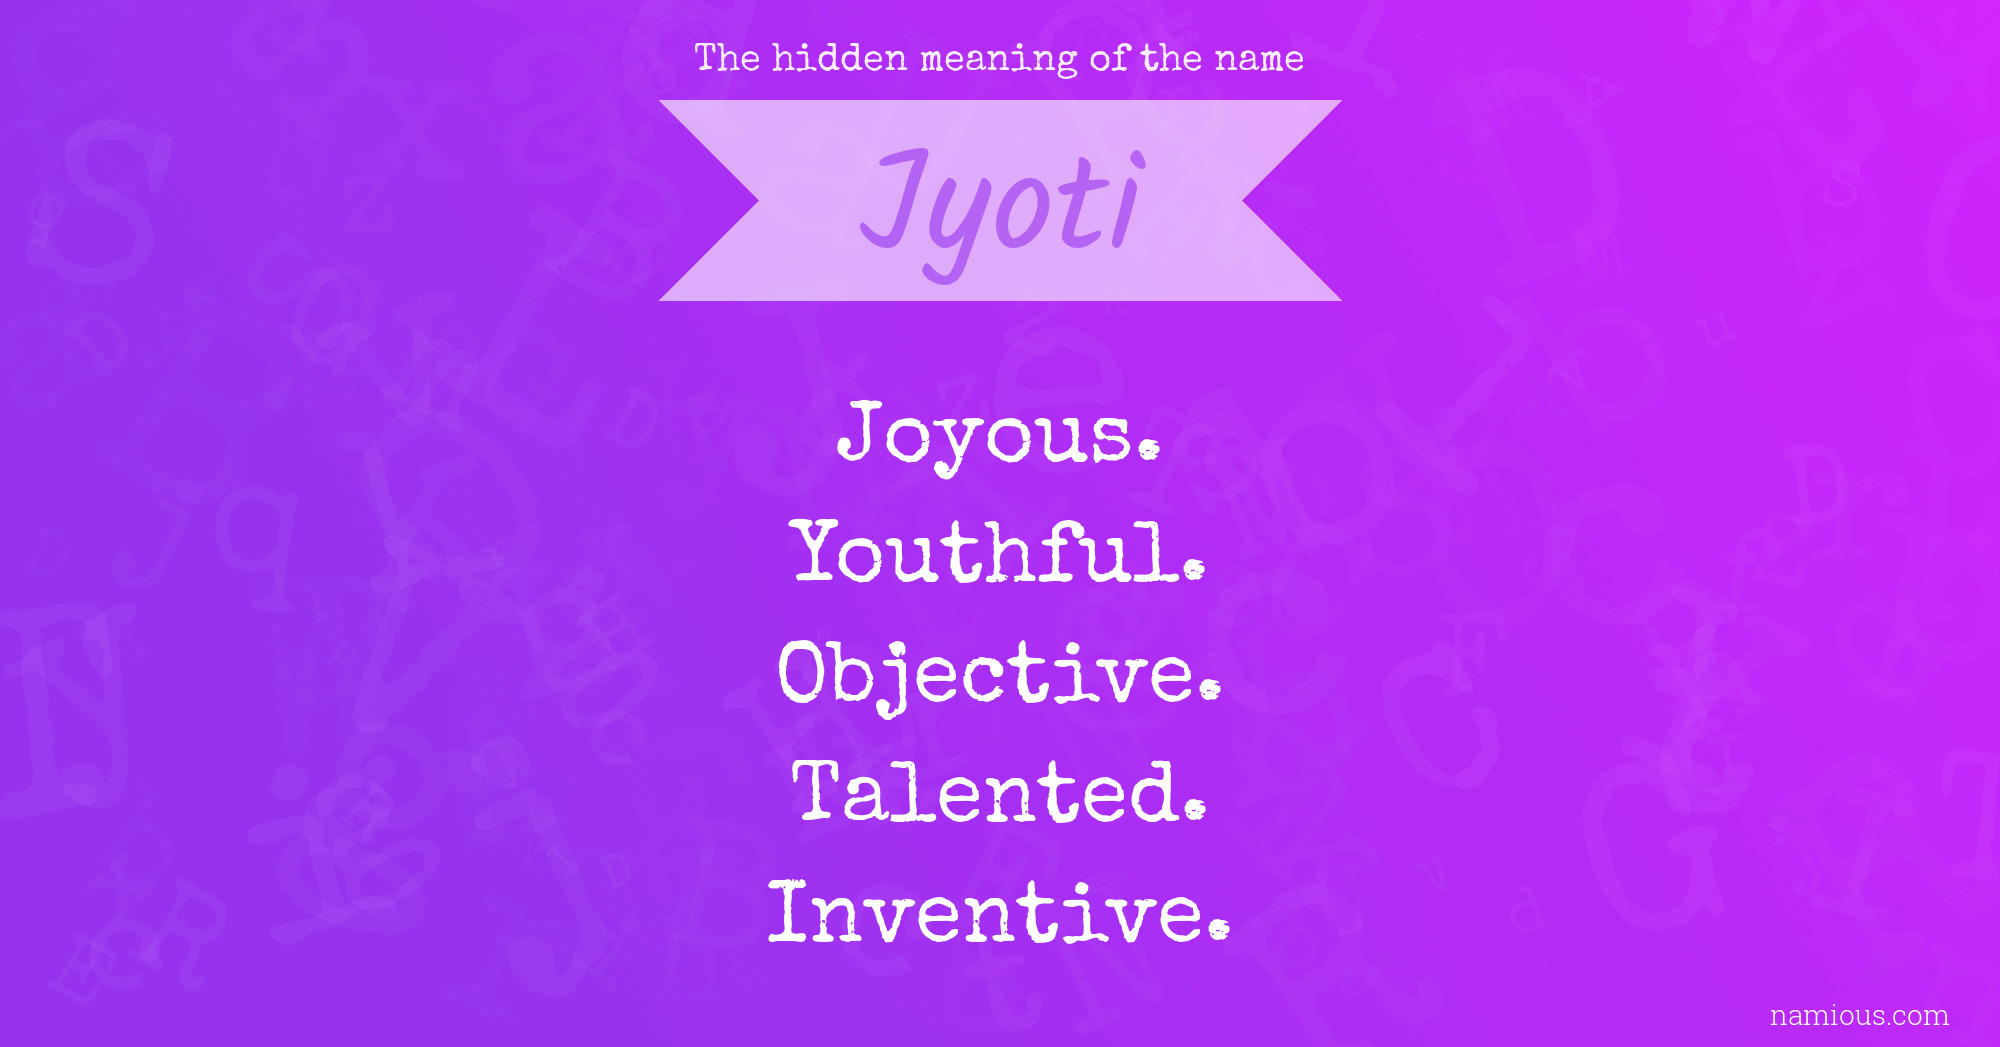 The hidden meaning of the name Jyoti